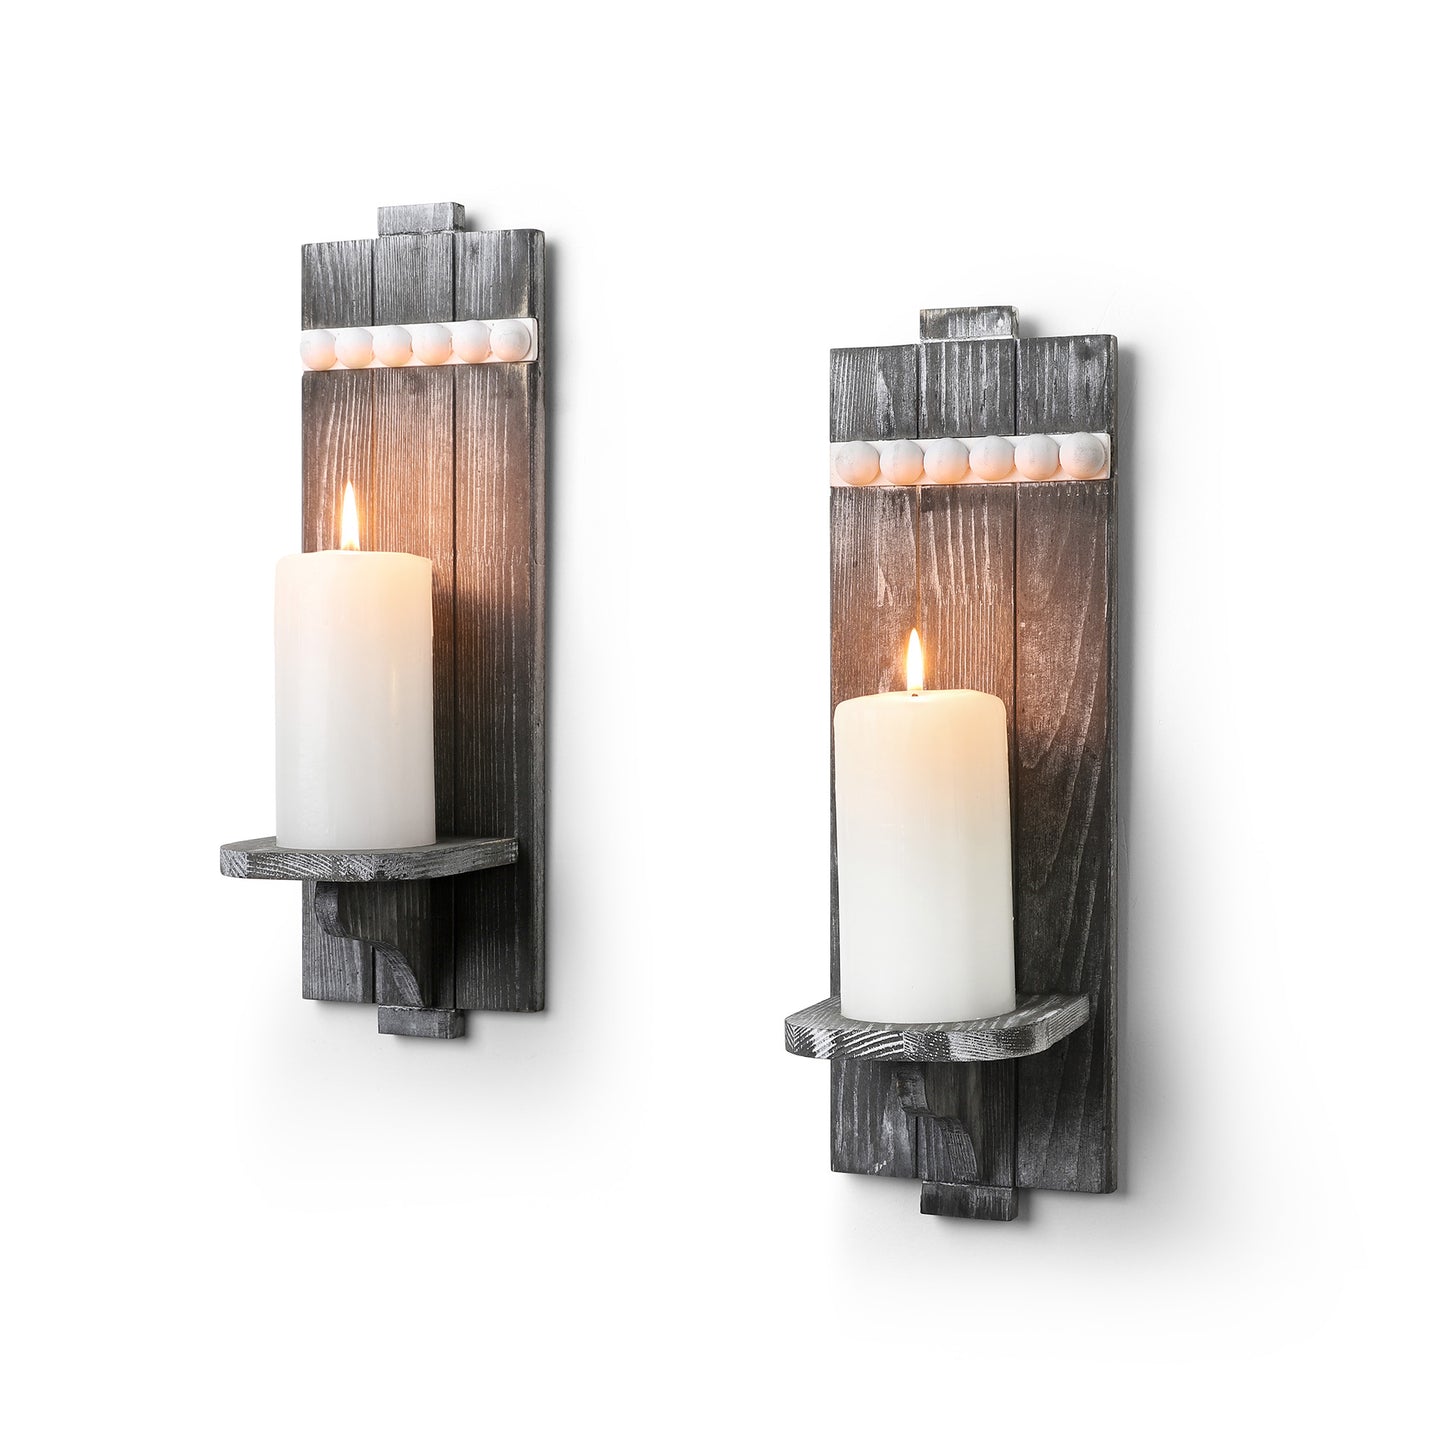 Black Sconces Wall Decor Set of 2, Candle Wall Decor,Wall Decor Living Room Decorations,Wall Sconces Decoratve, Dining Room Pictures Wall Decor, Hanging Wall Candle Holder, Candle Wall Hanger